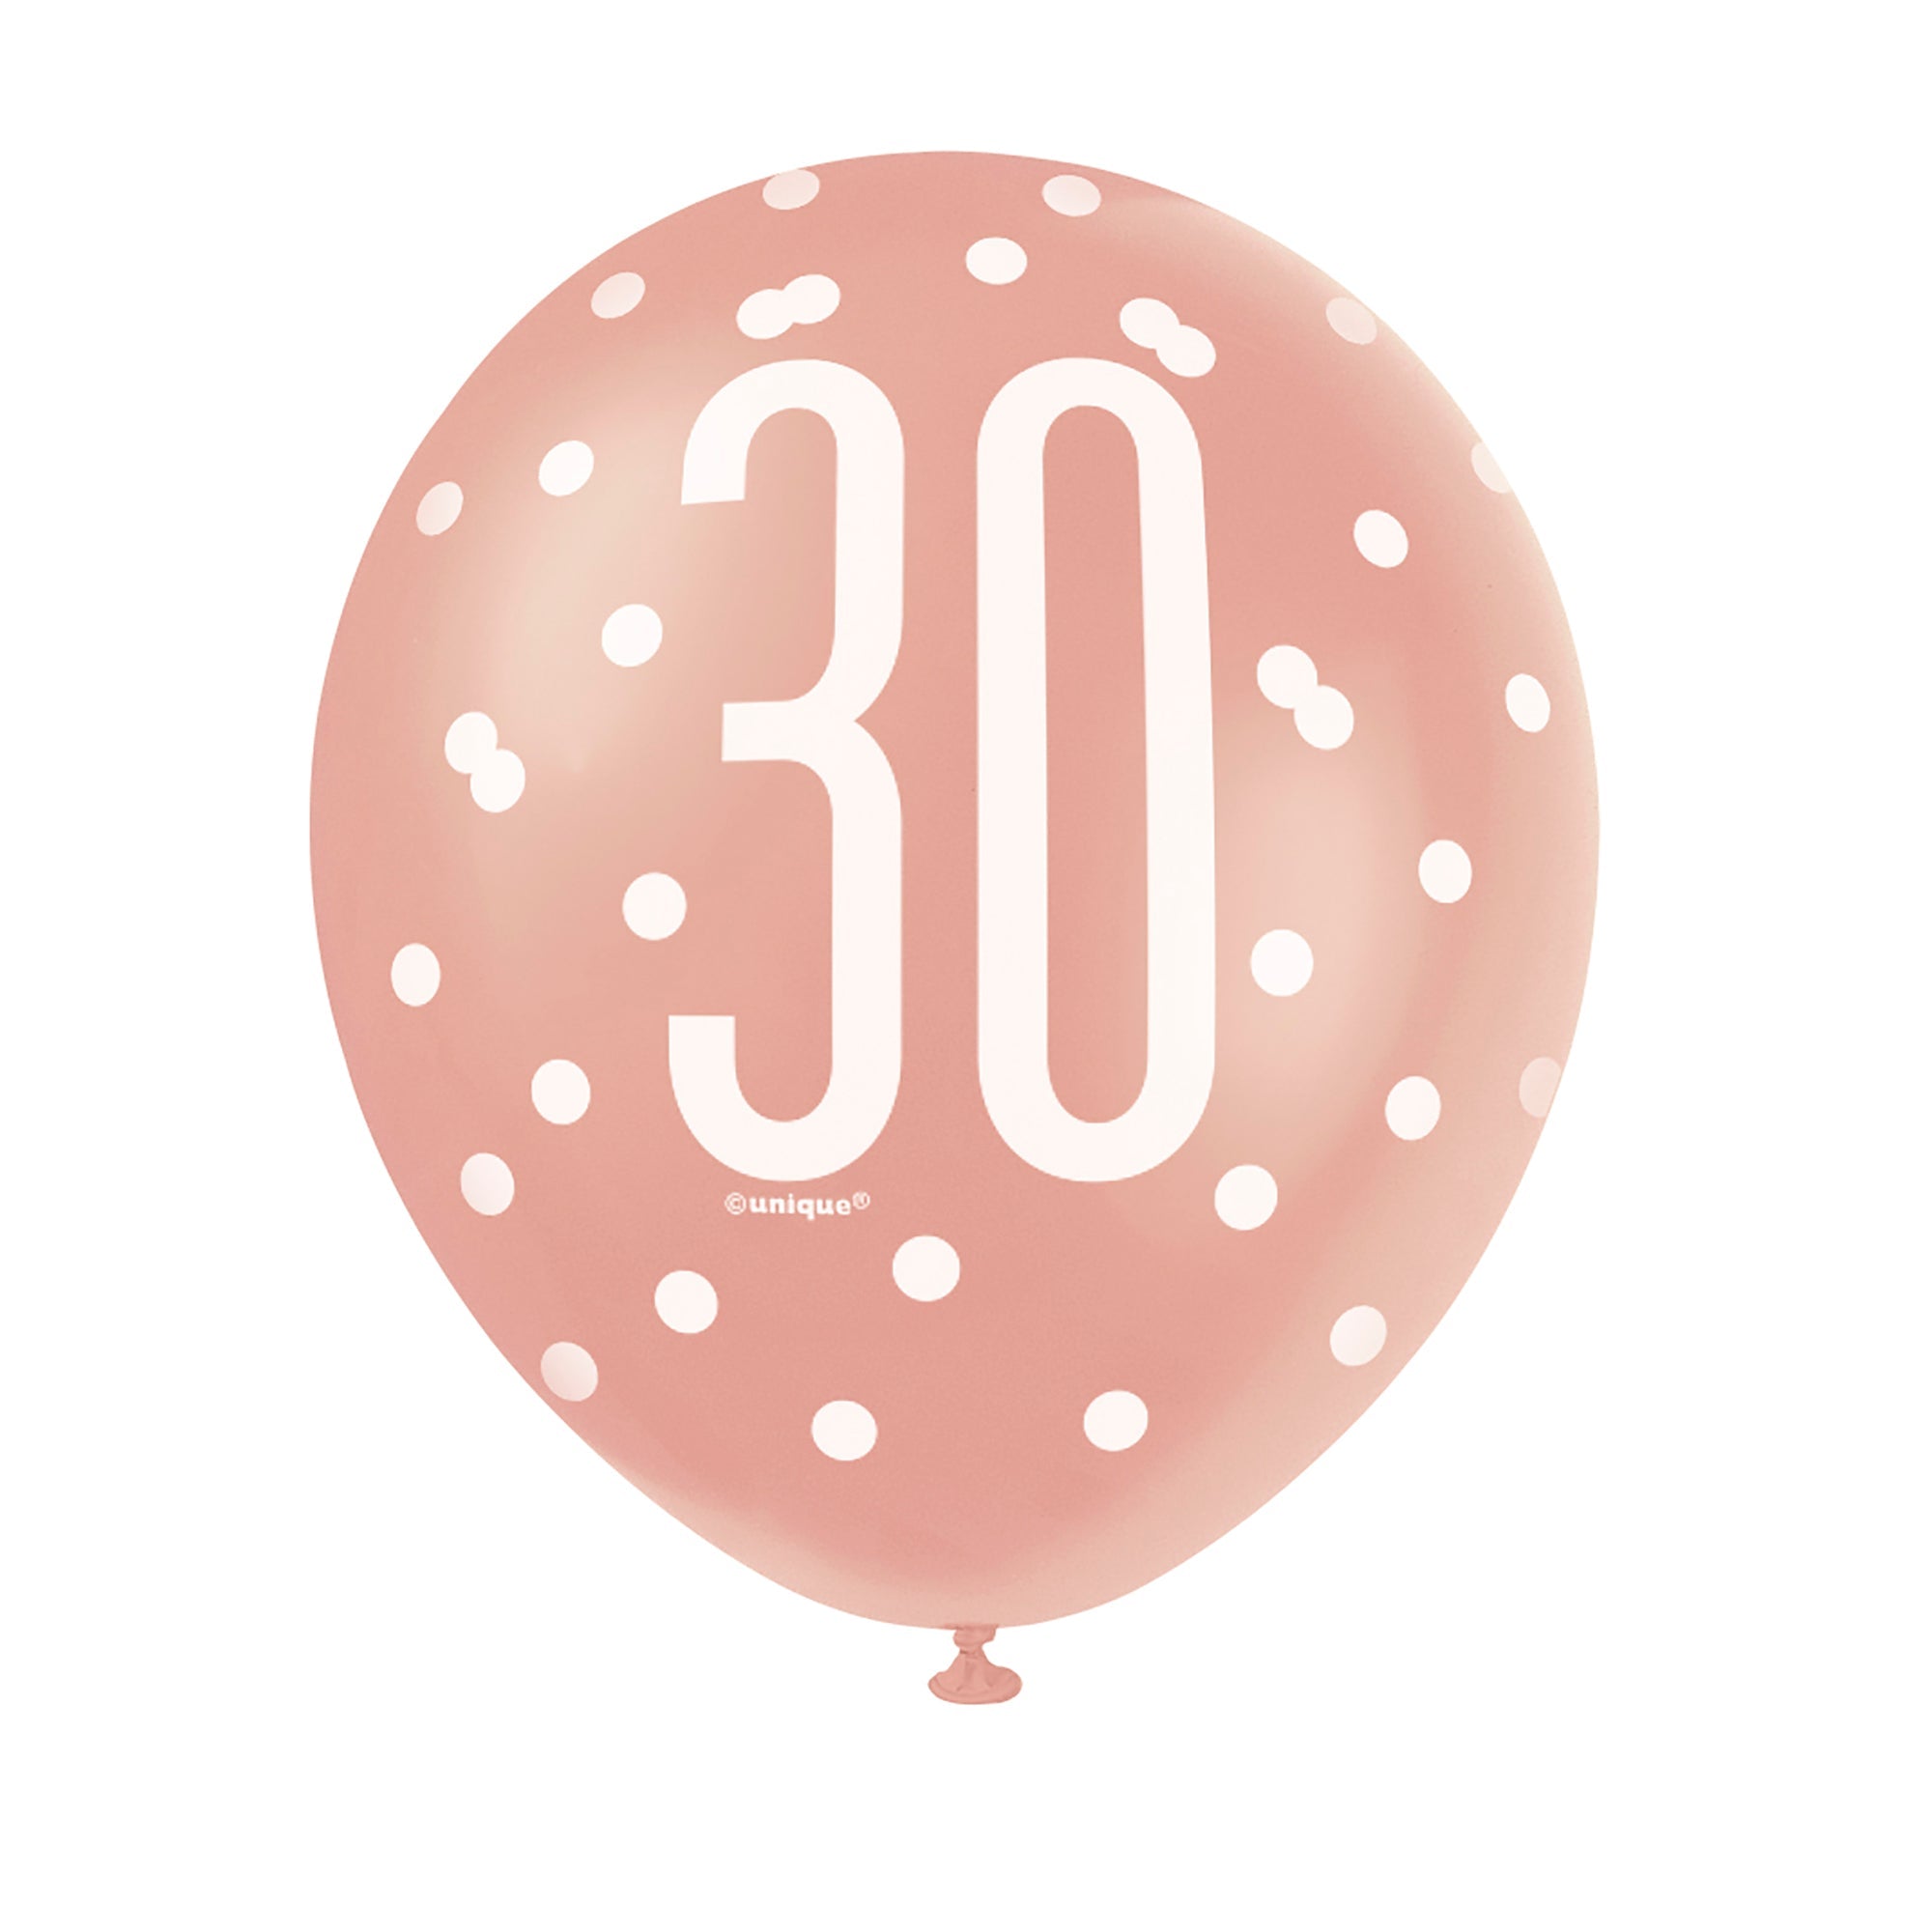 Age 30 6 Printed Latex Balloons 12in Pink and White 